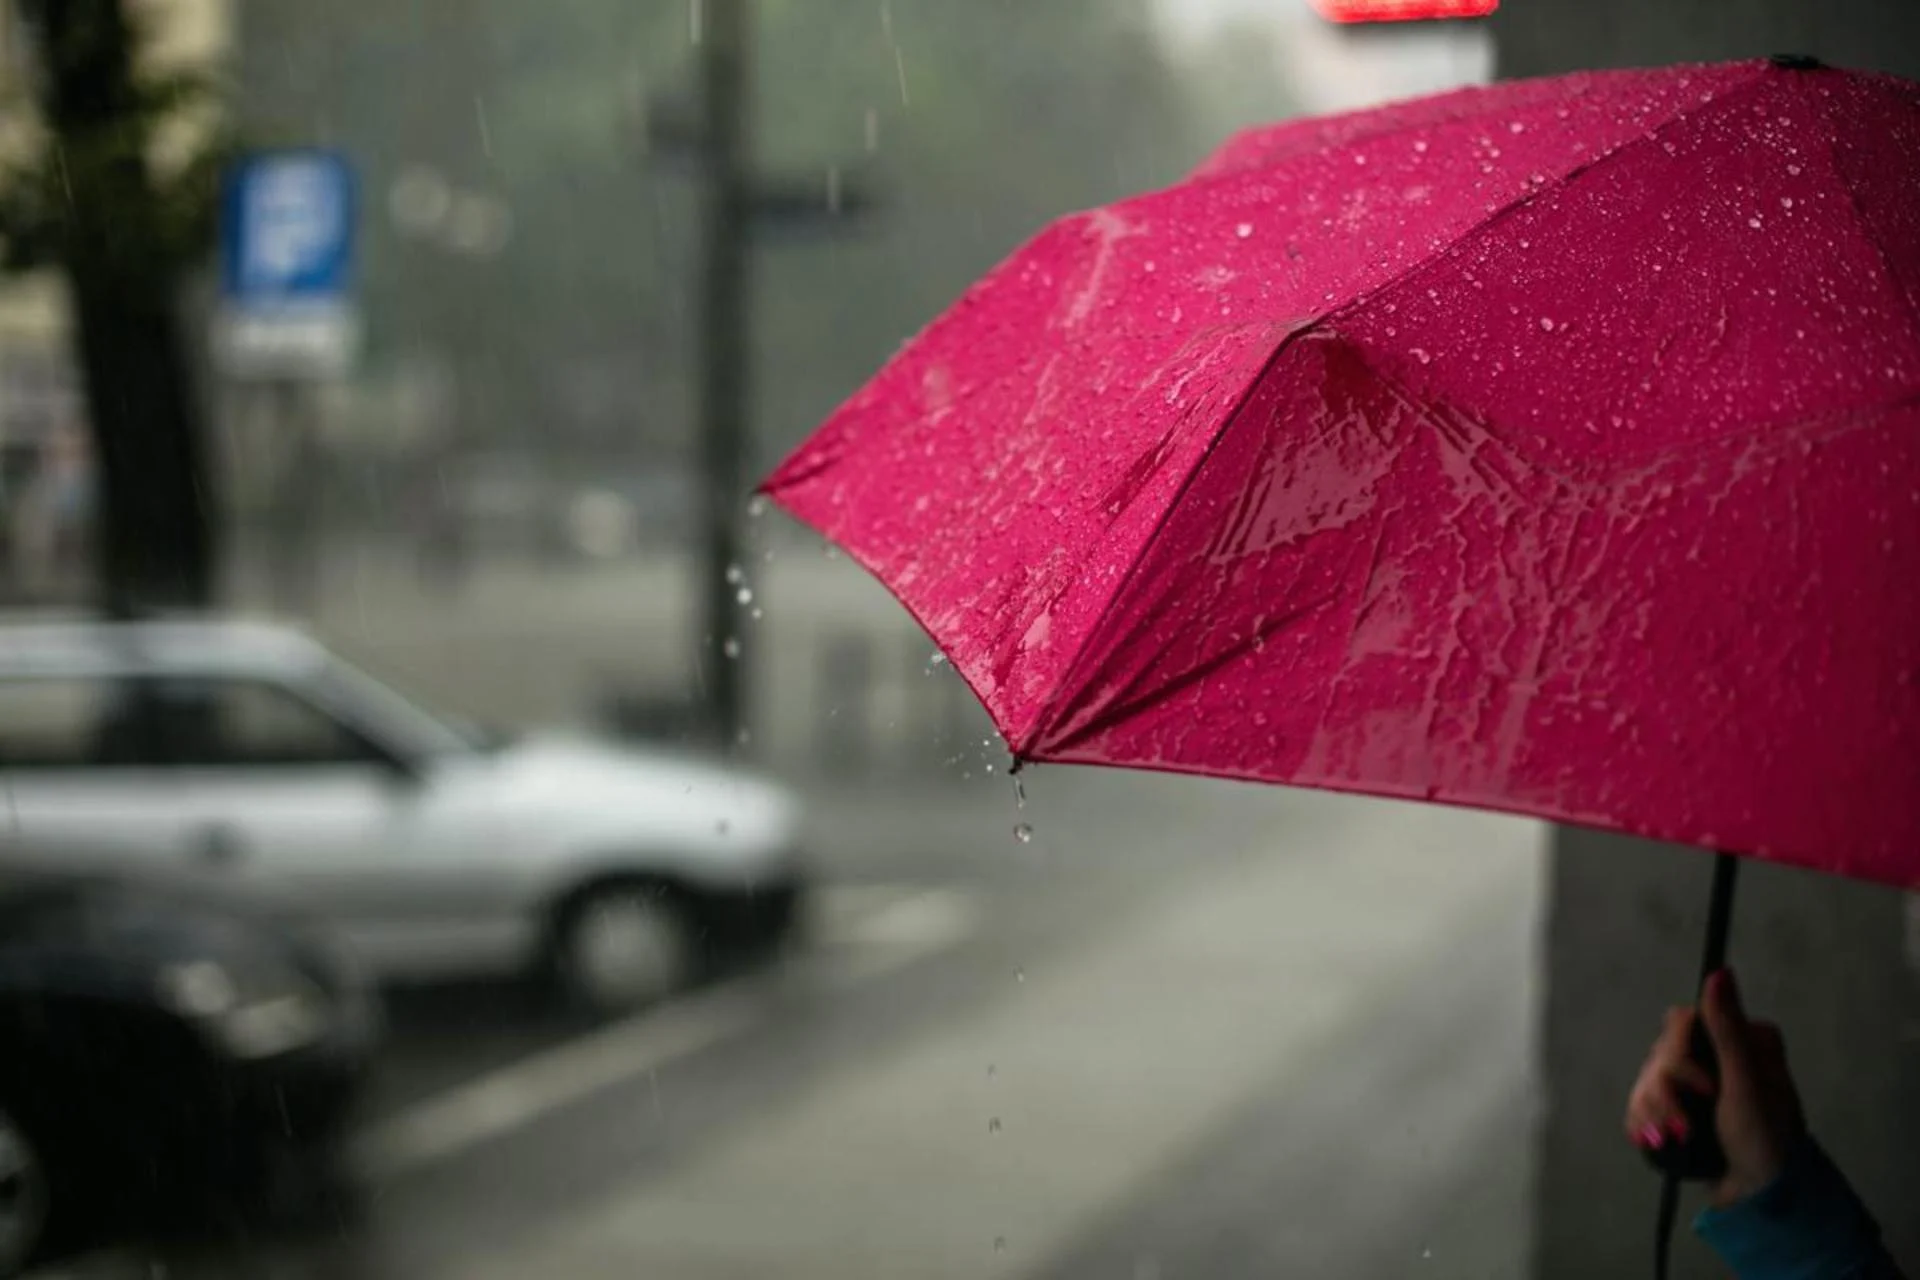 Significant rainfall coming to B.C. on Sunday will be helpful for the fire risk and drought conditions, but the heat will return soon. Timing, here